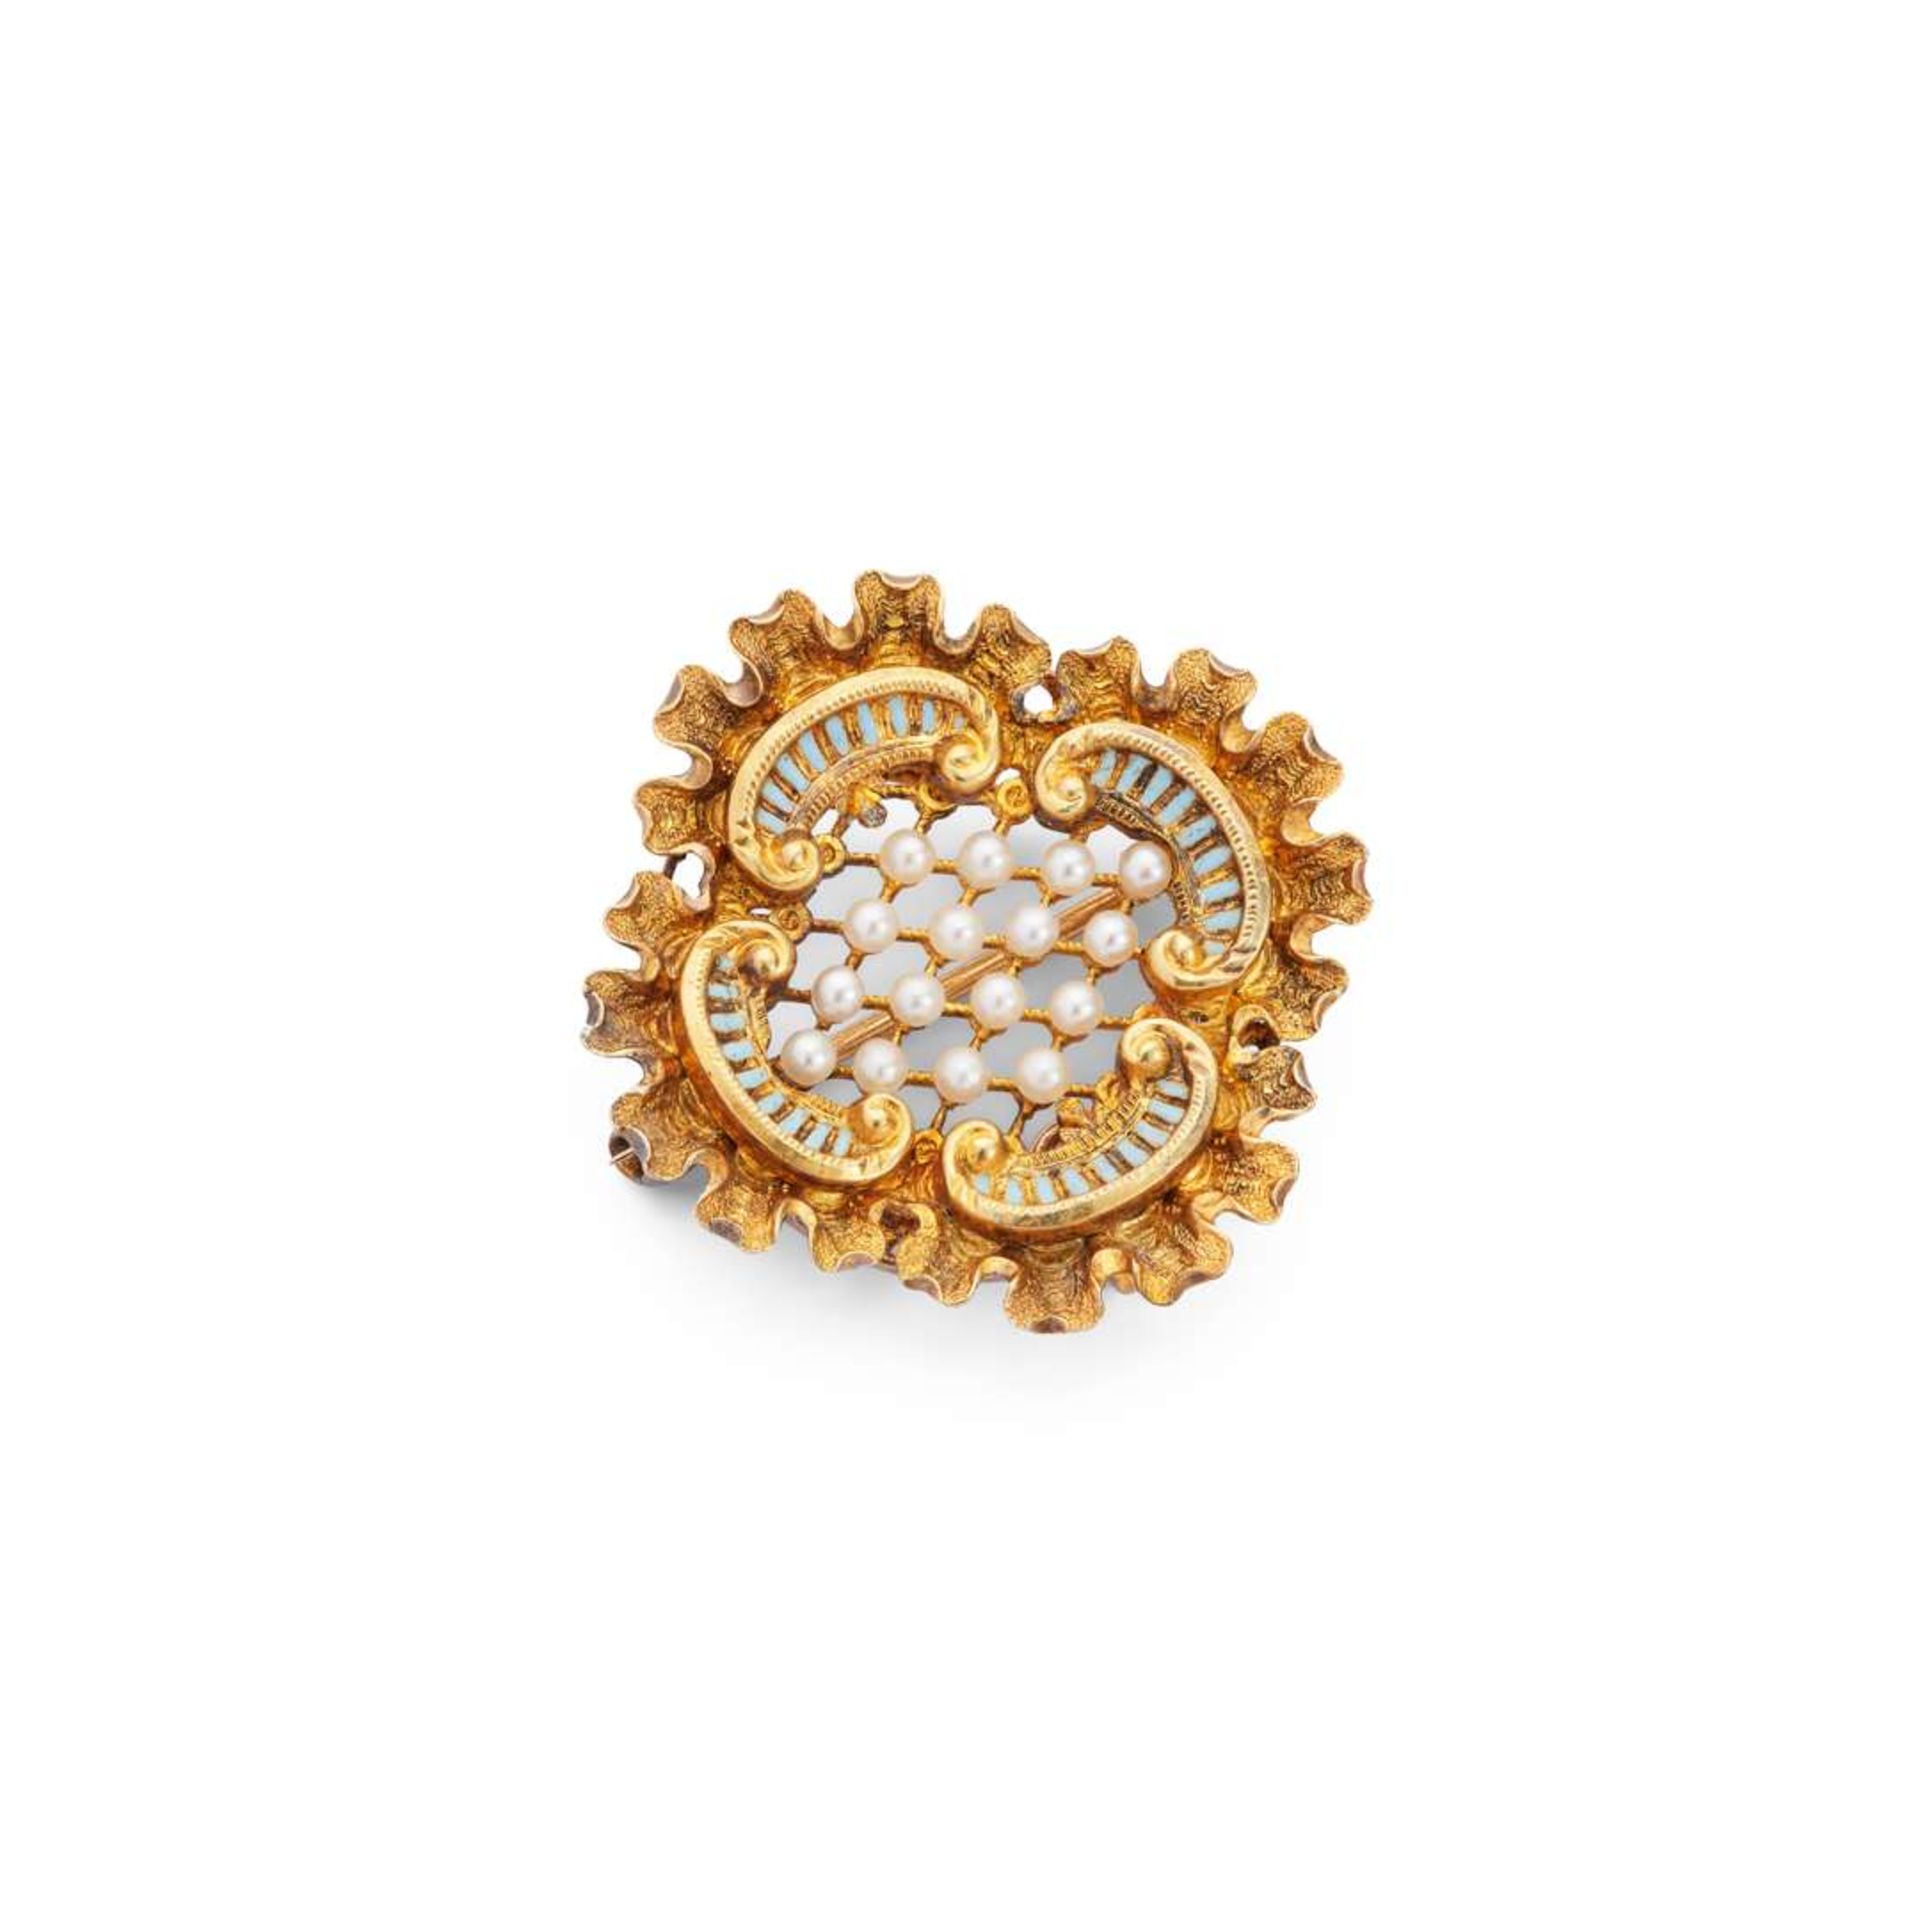 A 19th century seed pearl and enamel brooch, circa 1870